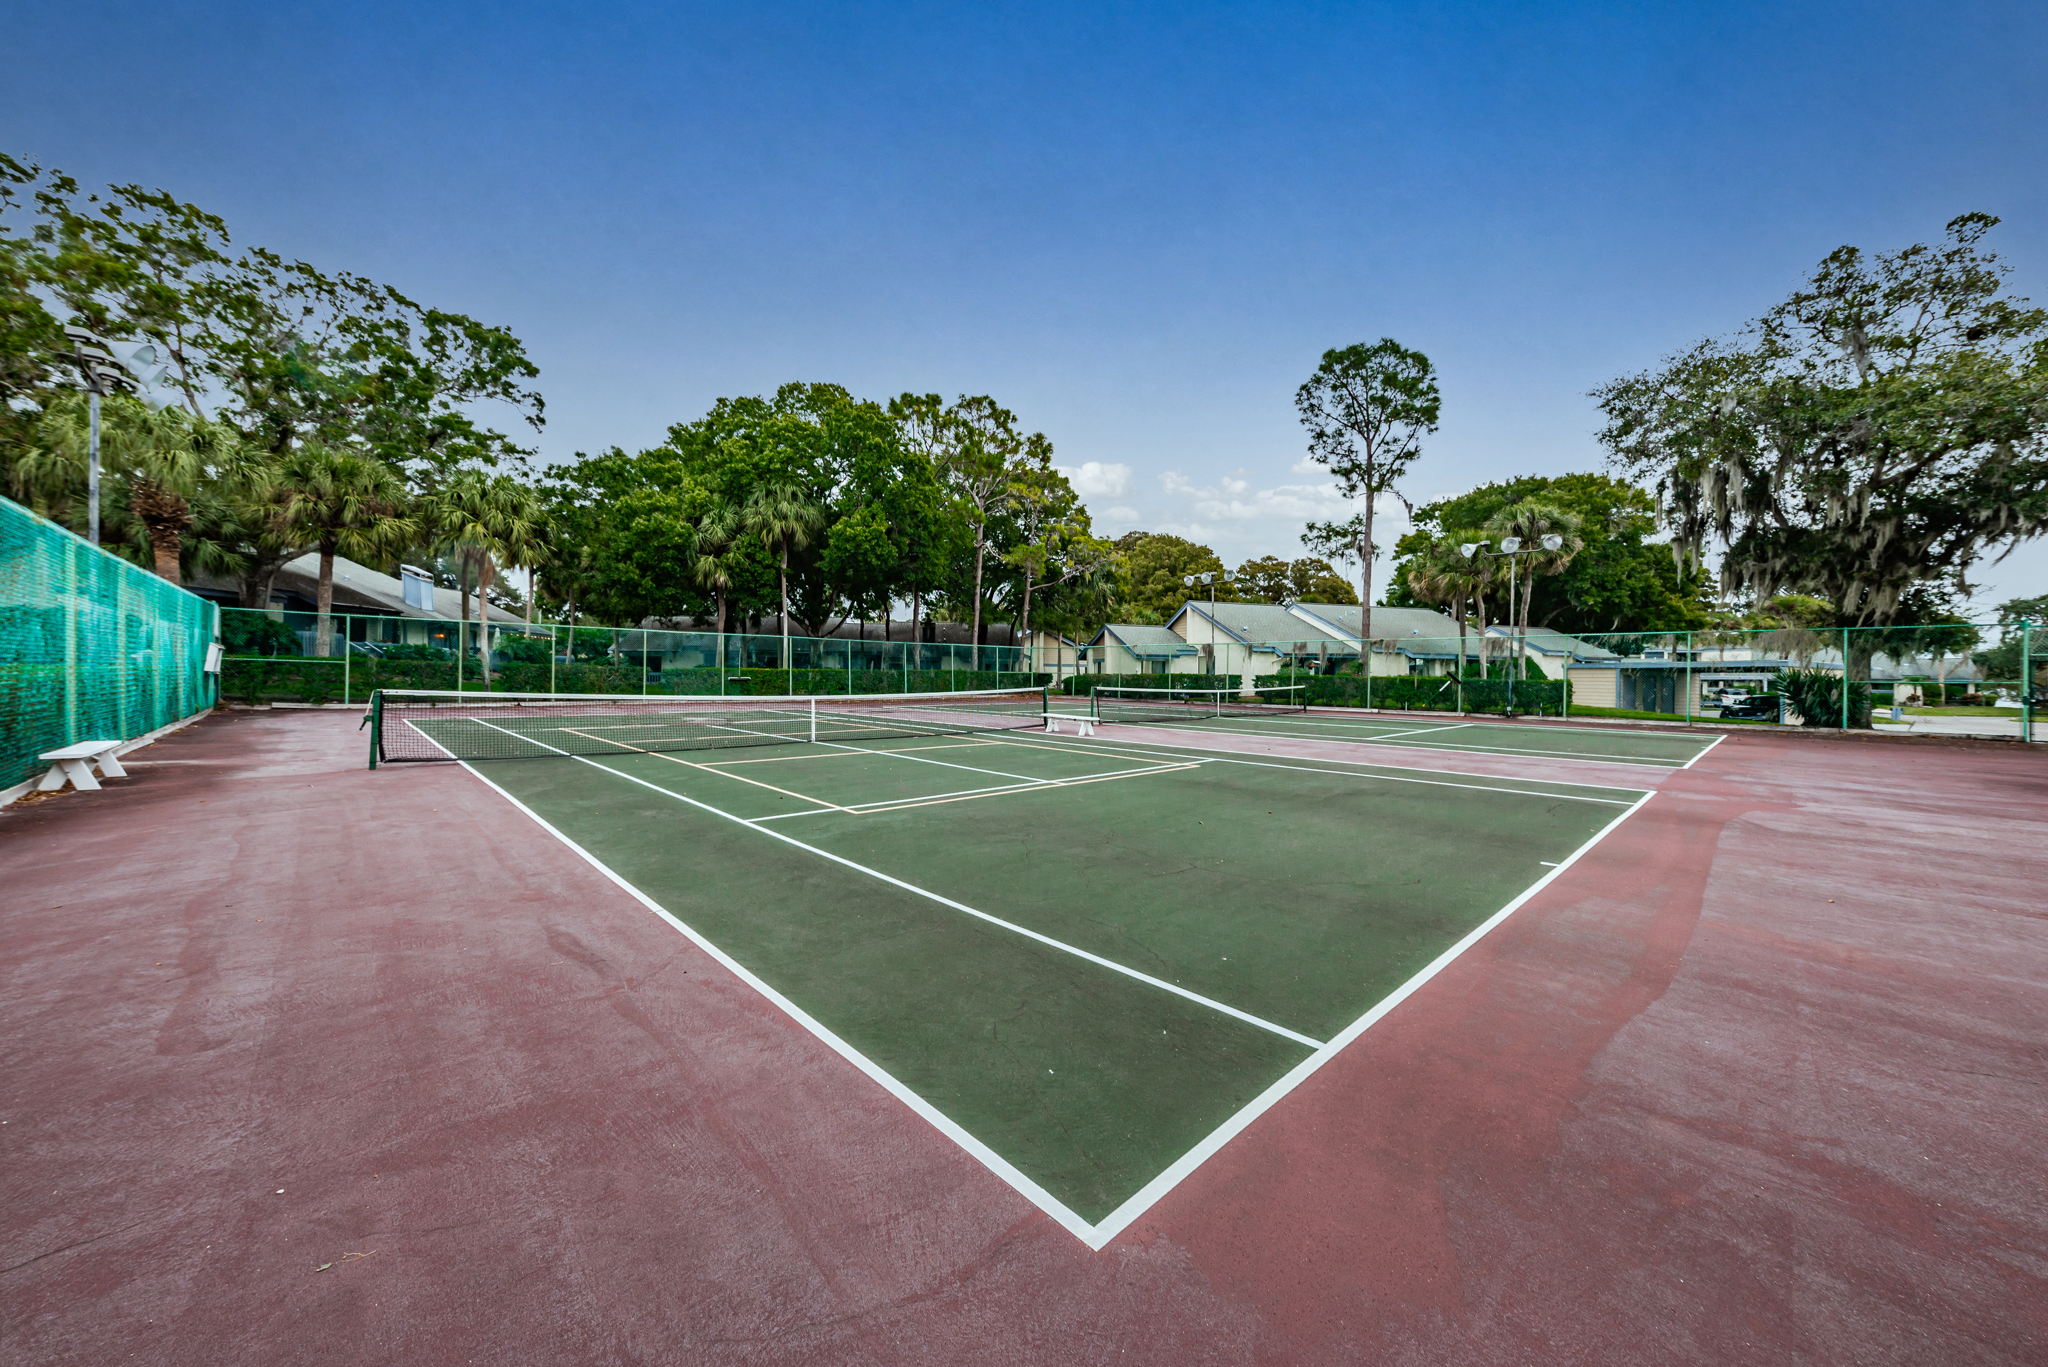 43-Tennis and Pickleball Courts